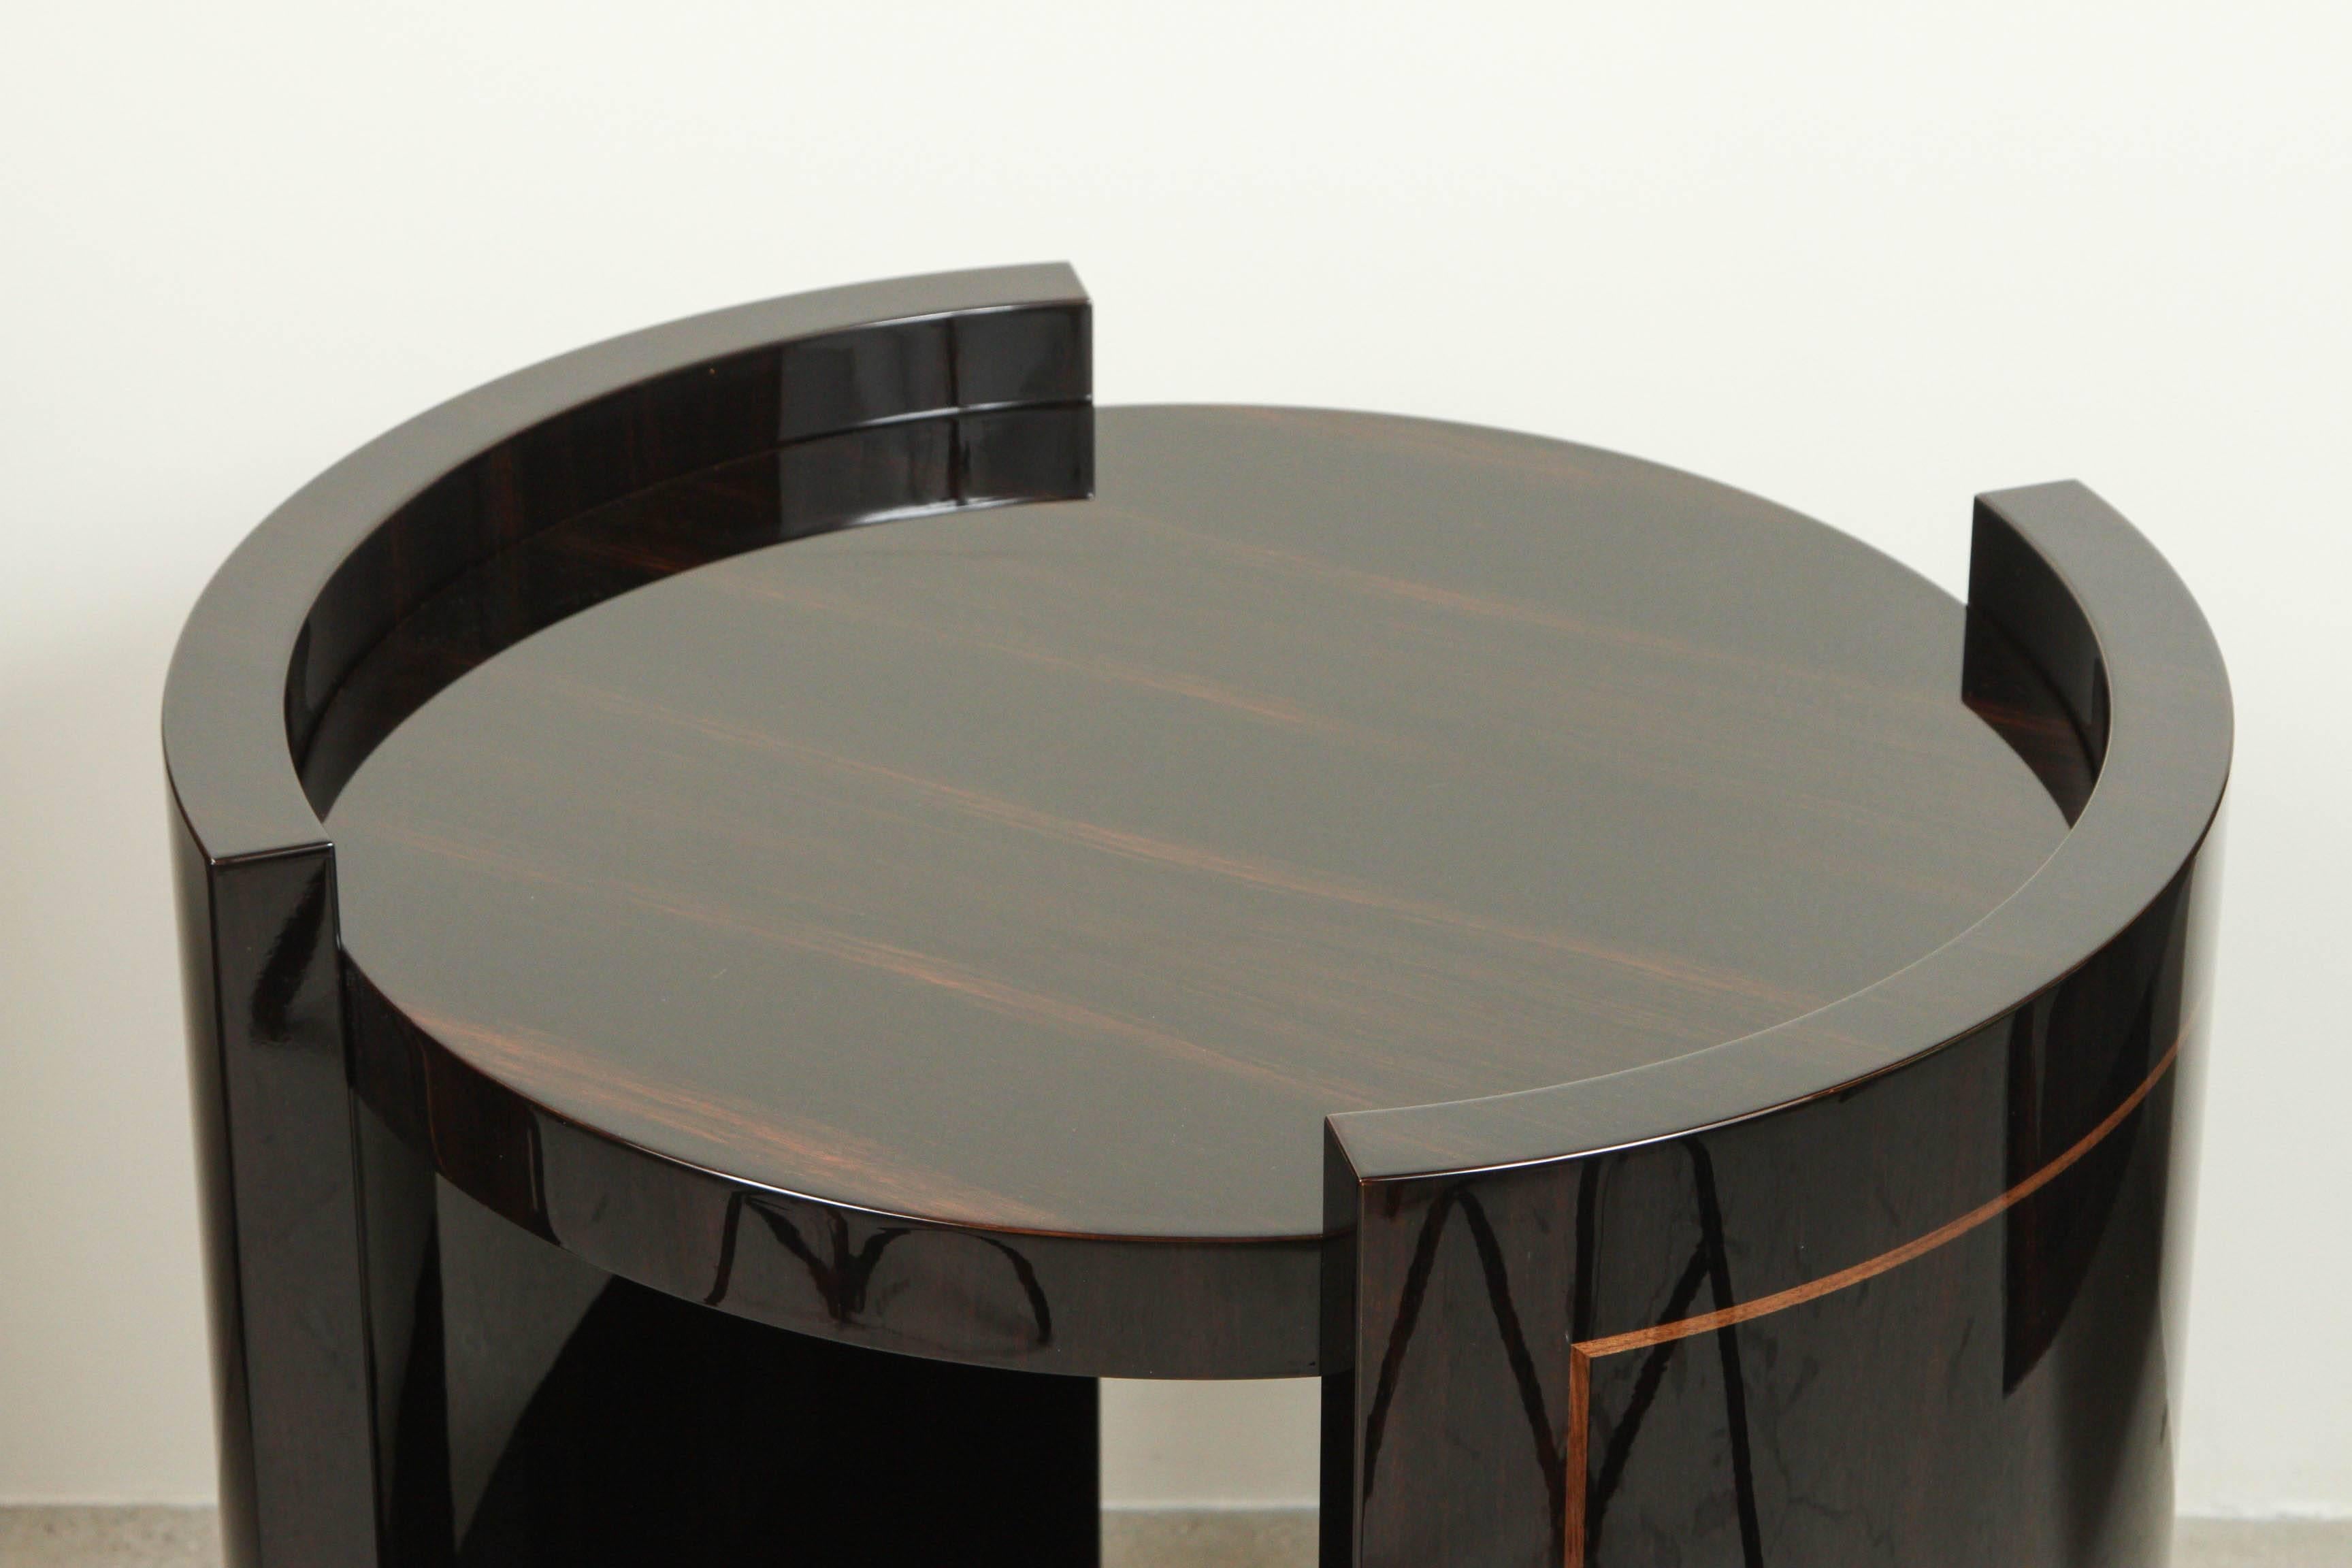 German fine furniture maker, Cygal Art Deco, creates stylish elegance with this open column side table from their 